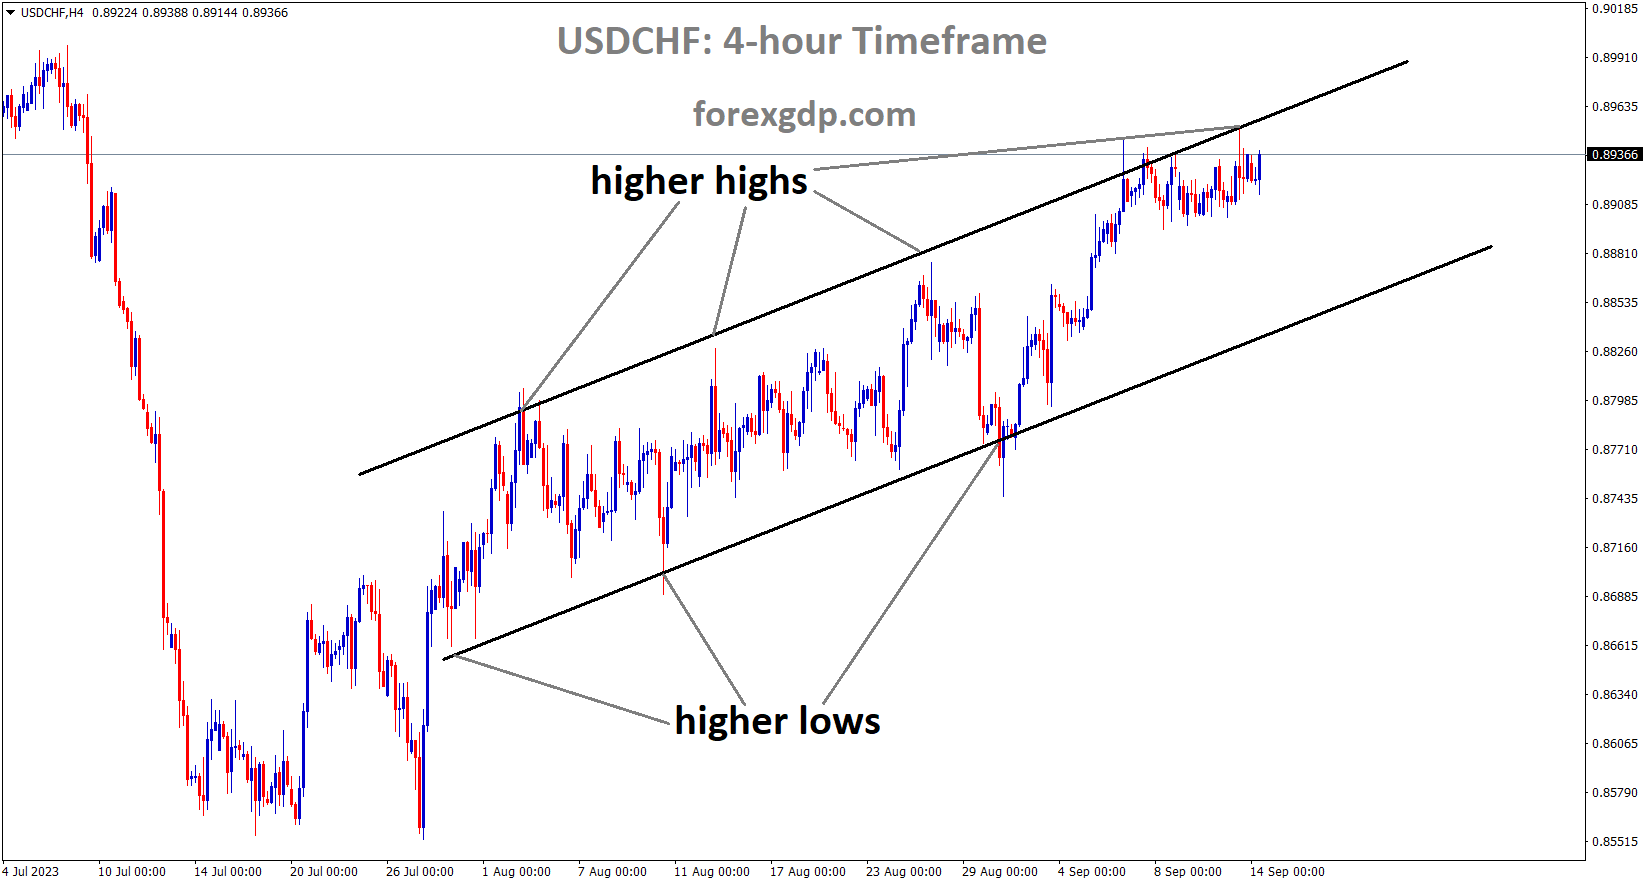 USDCHF is moving in an Ascending channel and the market has reached the higher high area of the channel